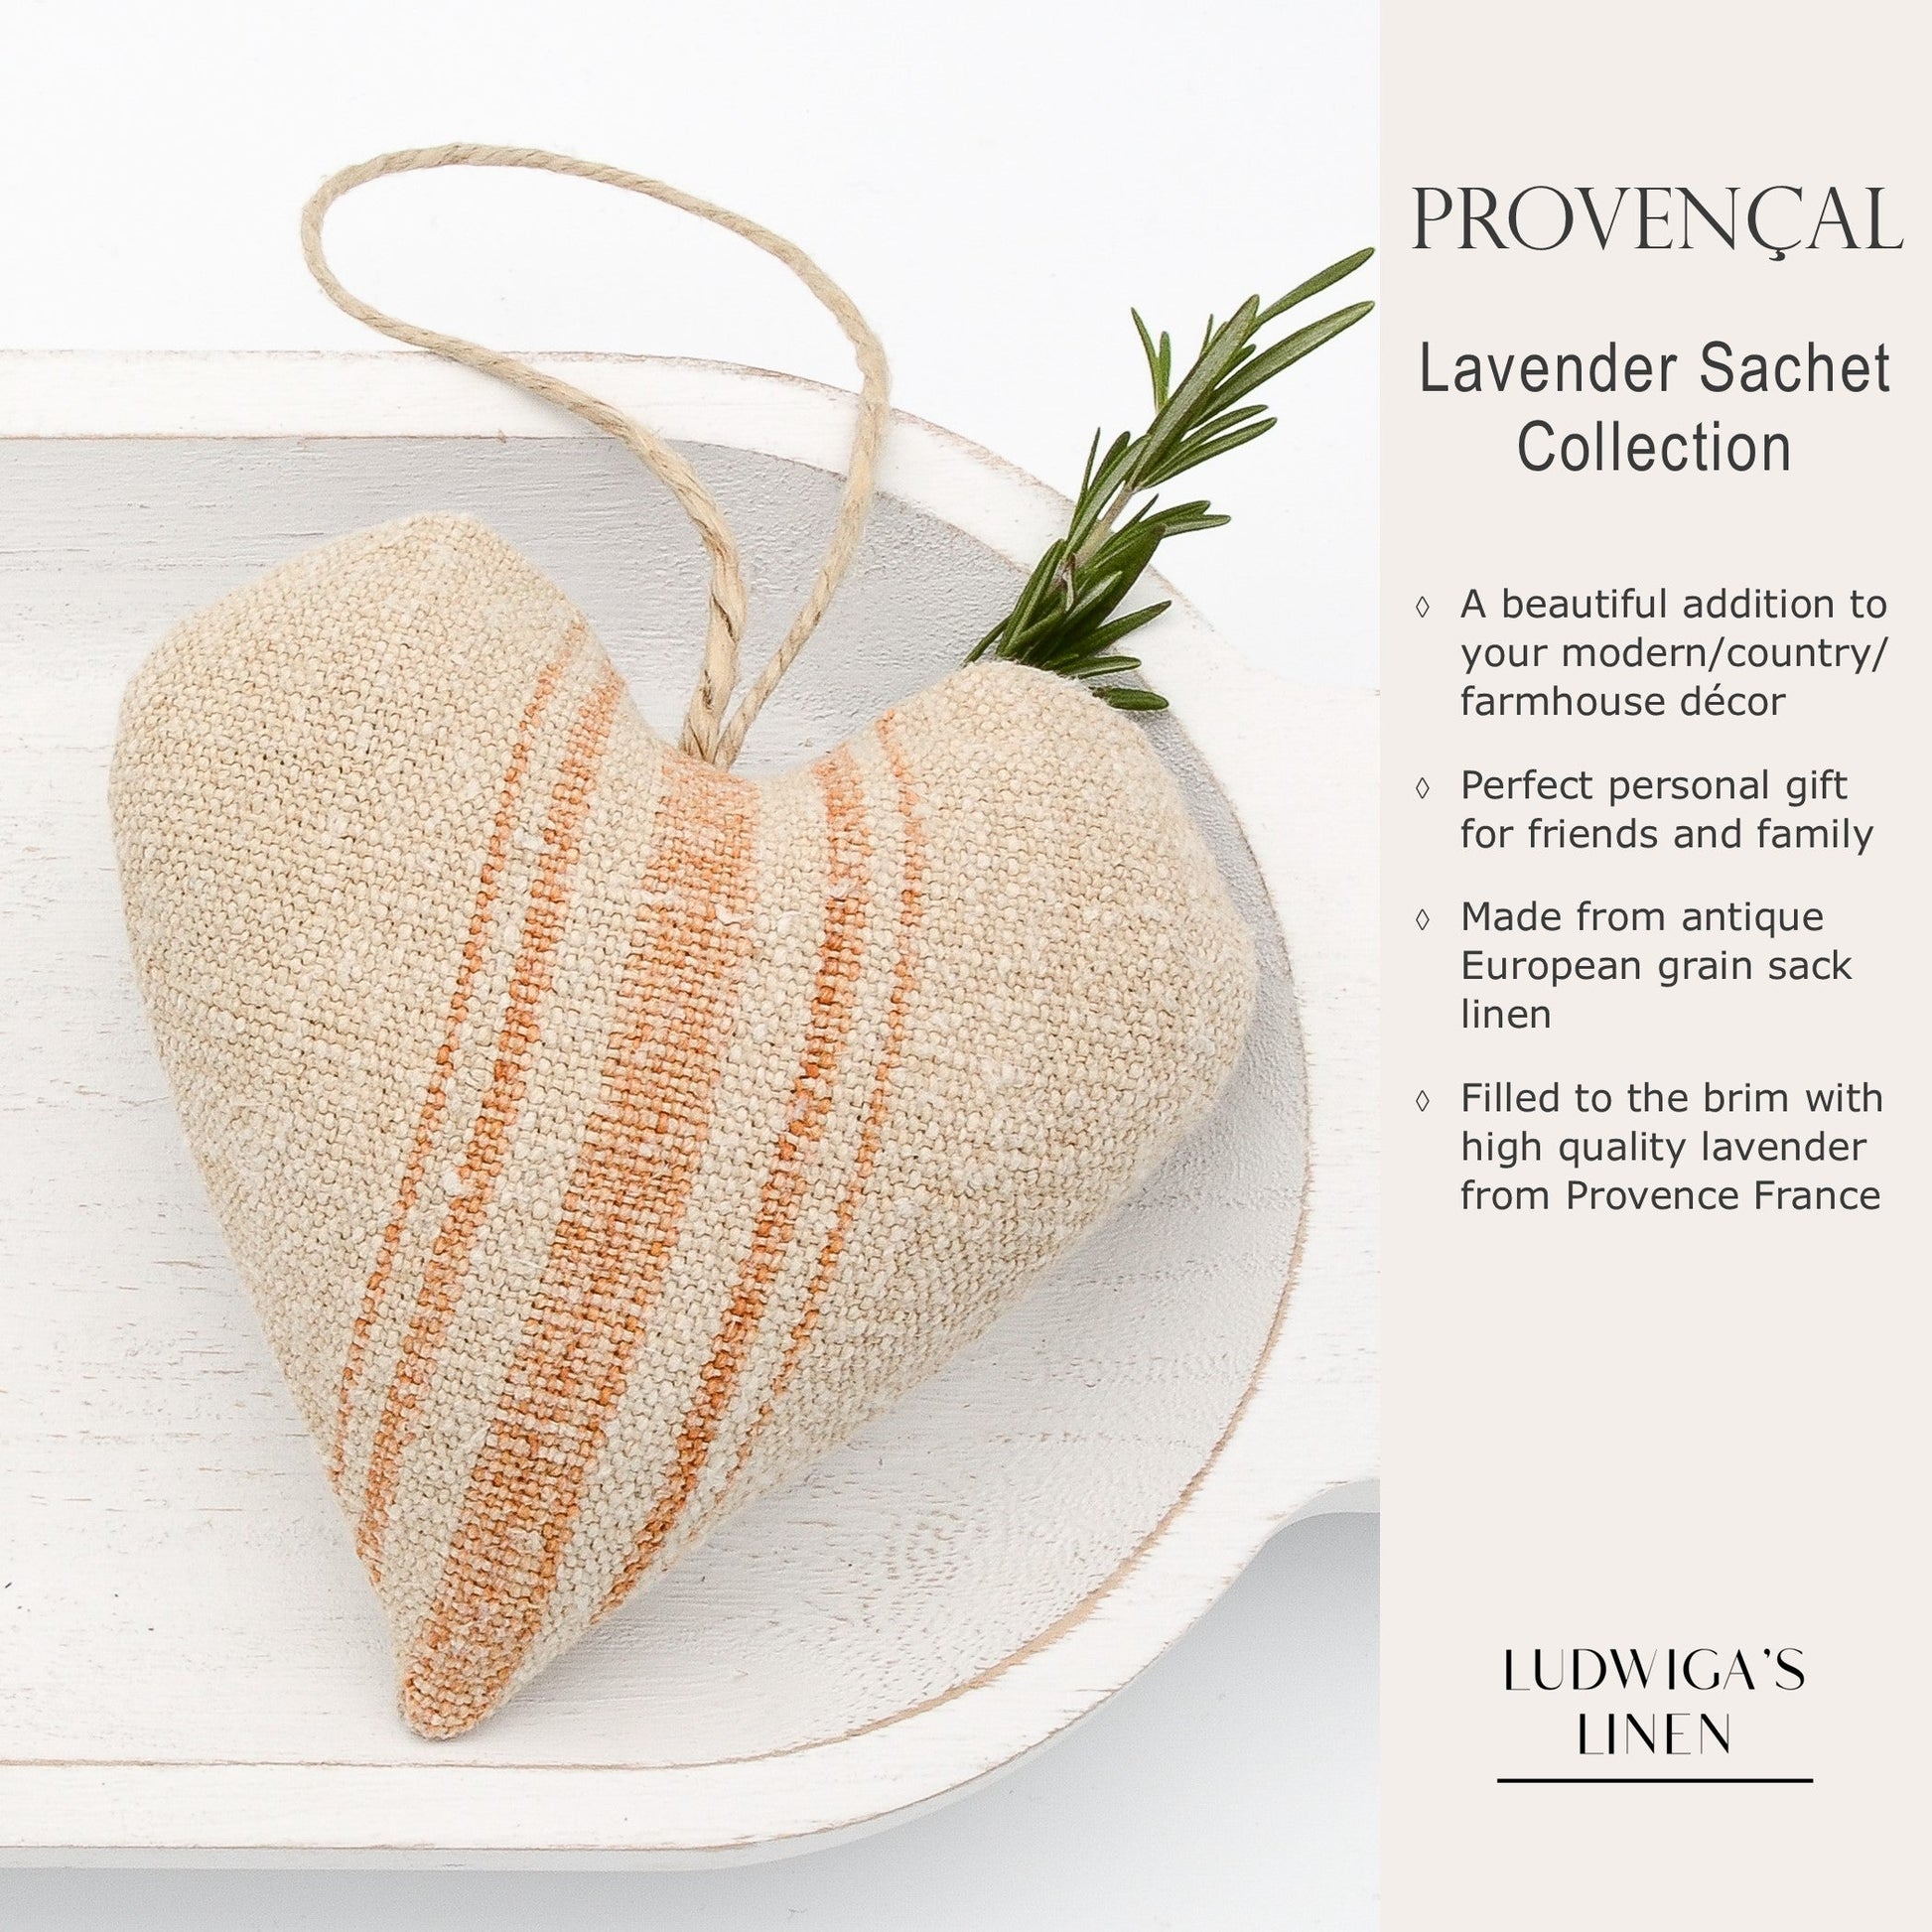 Lavender sachet heart made from antique European grain sack linen, hemp twine tie, and filled with high quality lavender from Provence France